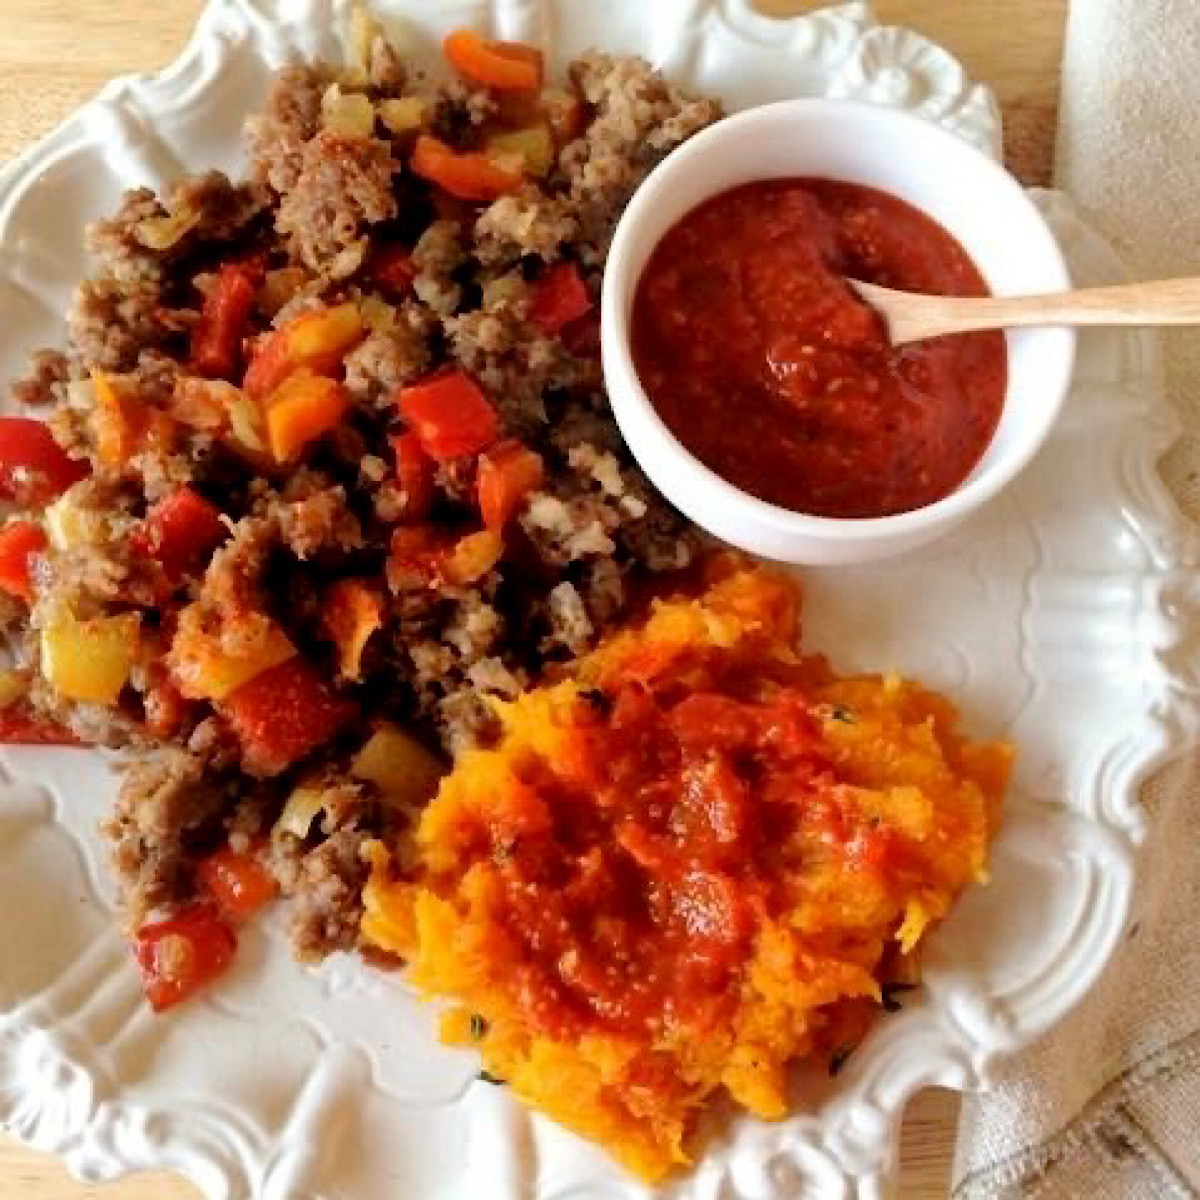 Slow carb dinner of  ground beef peperonata  with butternut squash and romesco sauce.